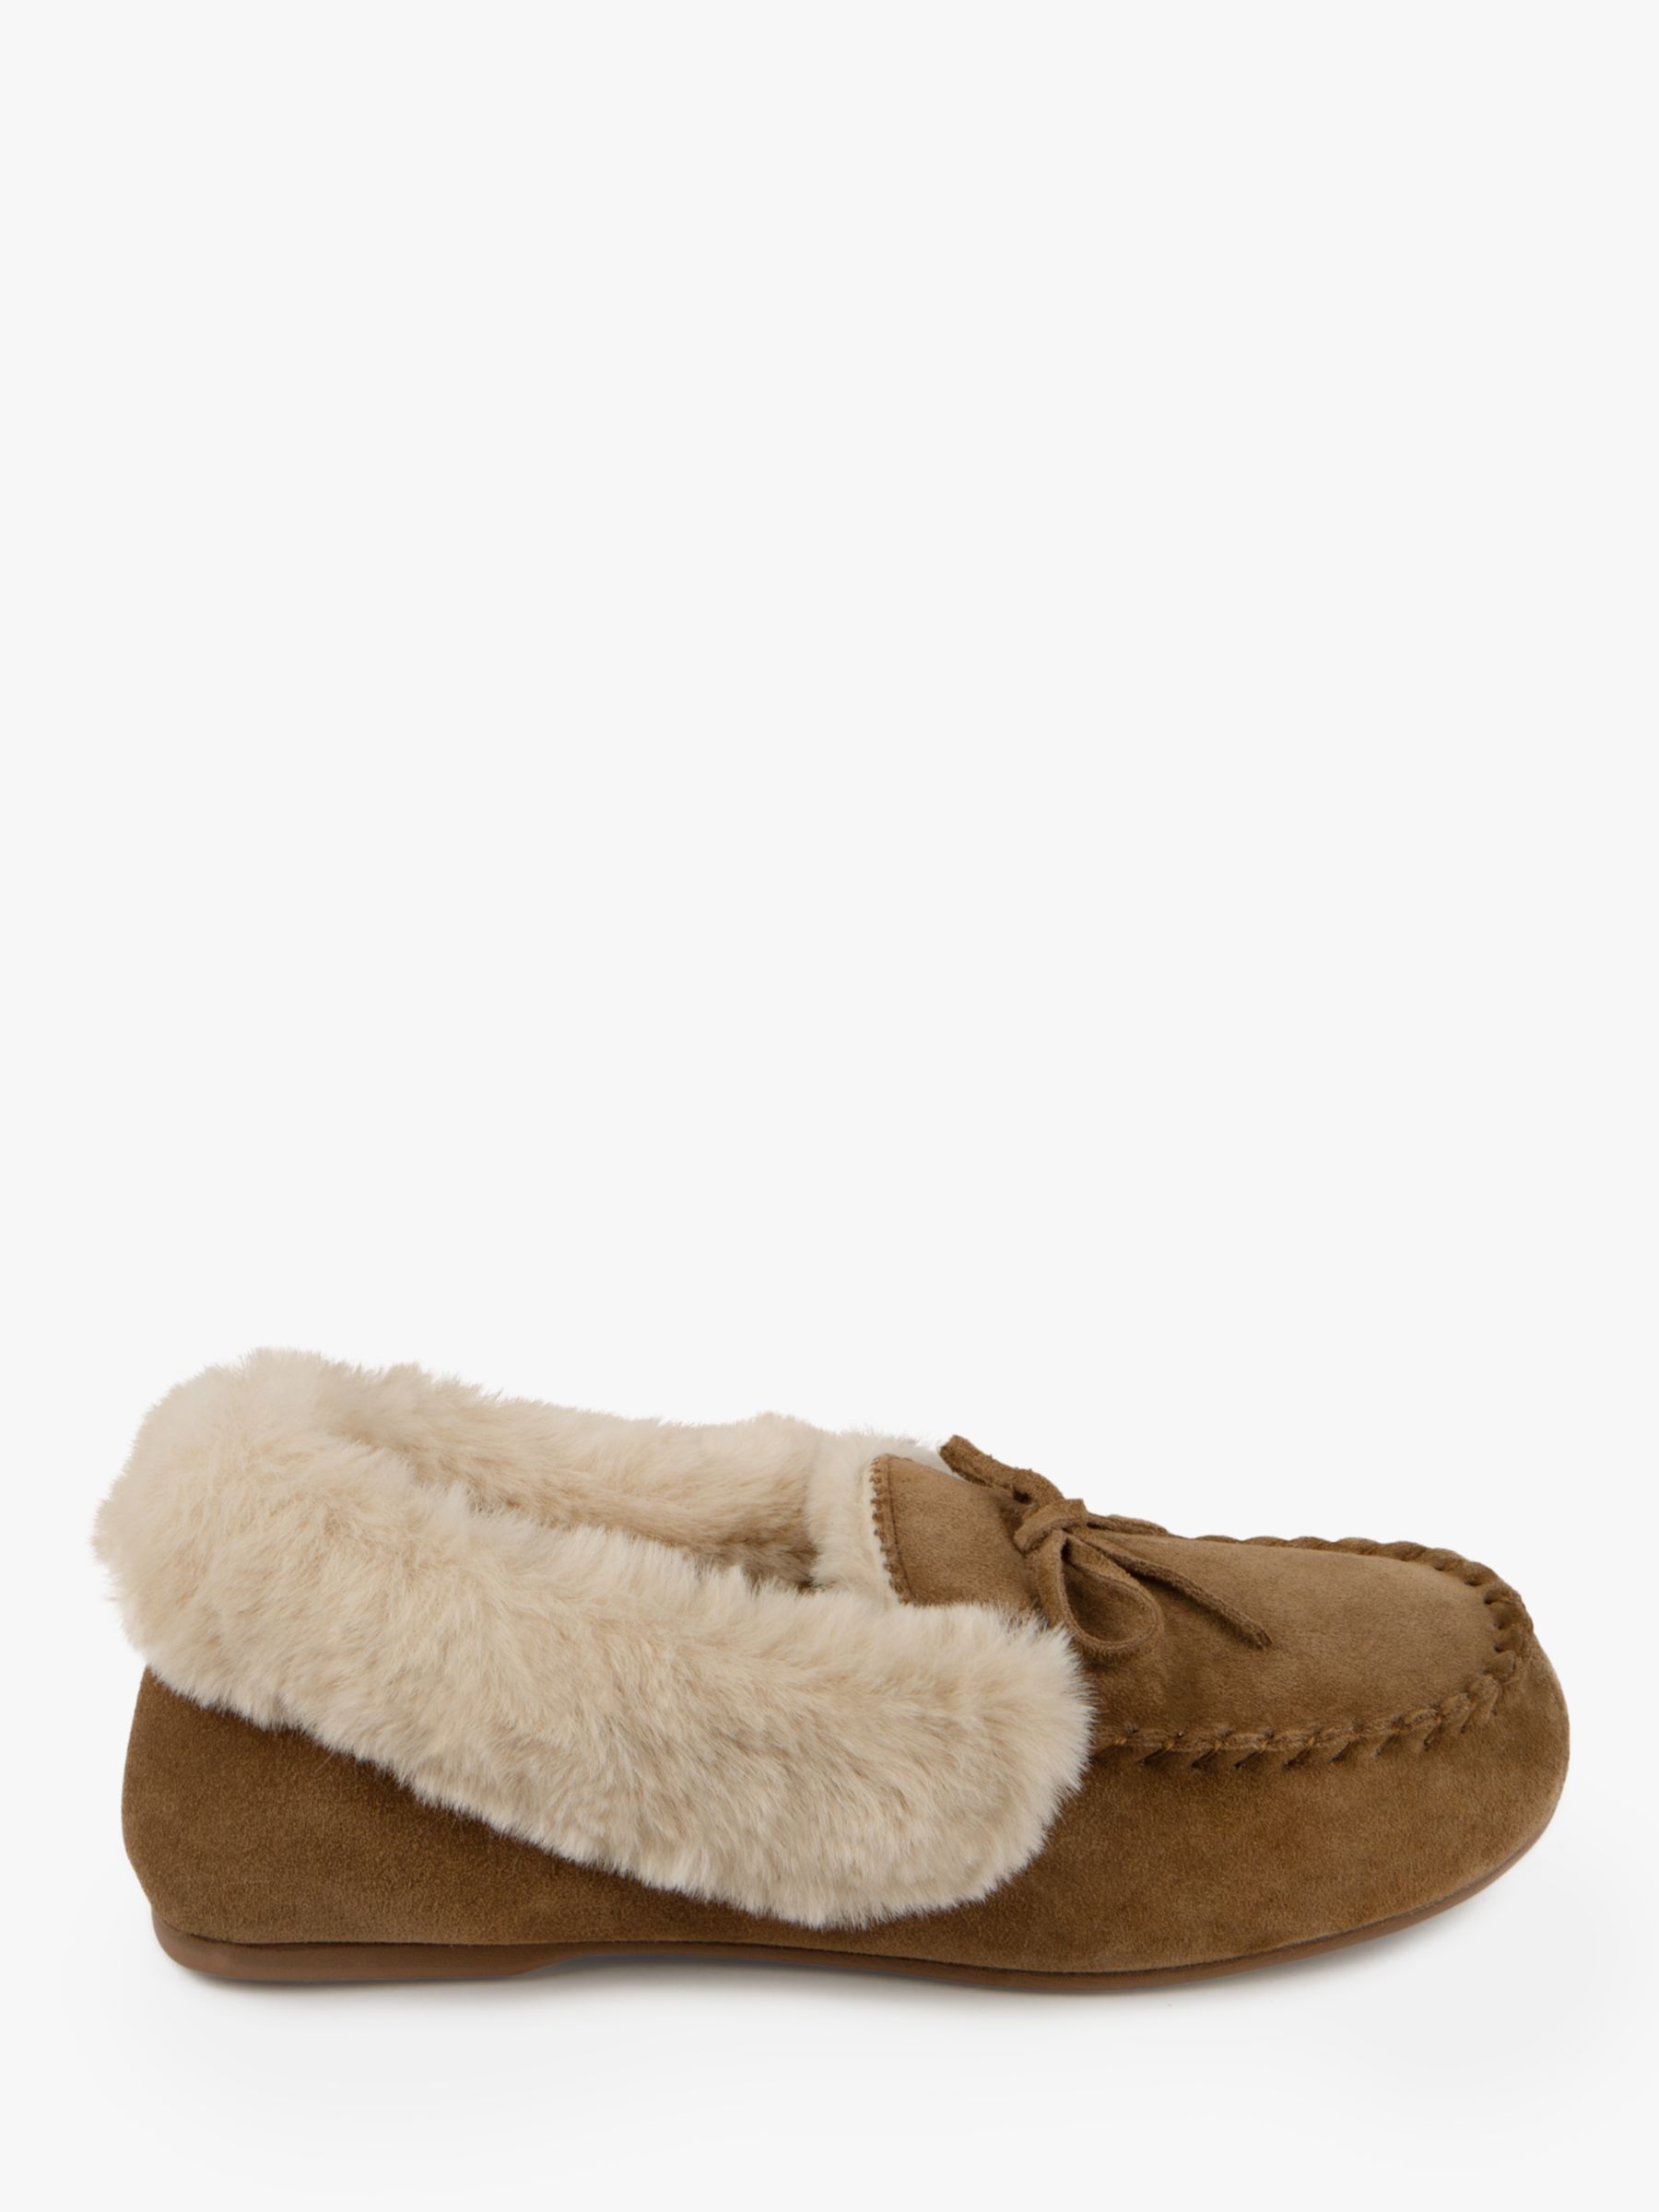 totes Genuine Suede Moccasin with Faux Fur Lining Slippers, Tan, 4